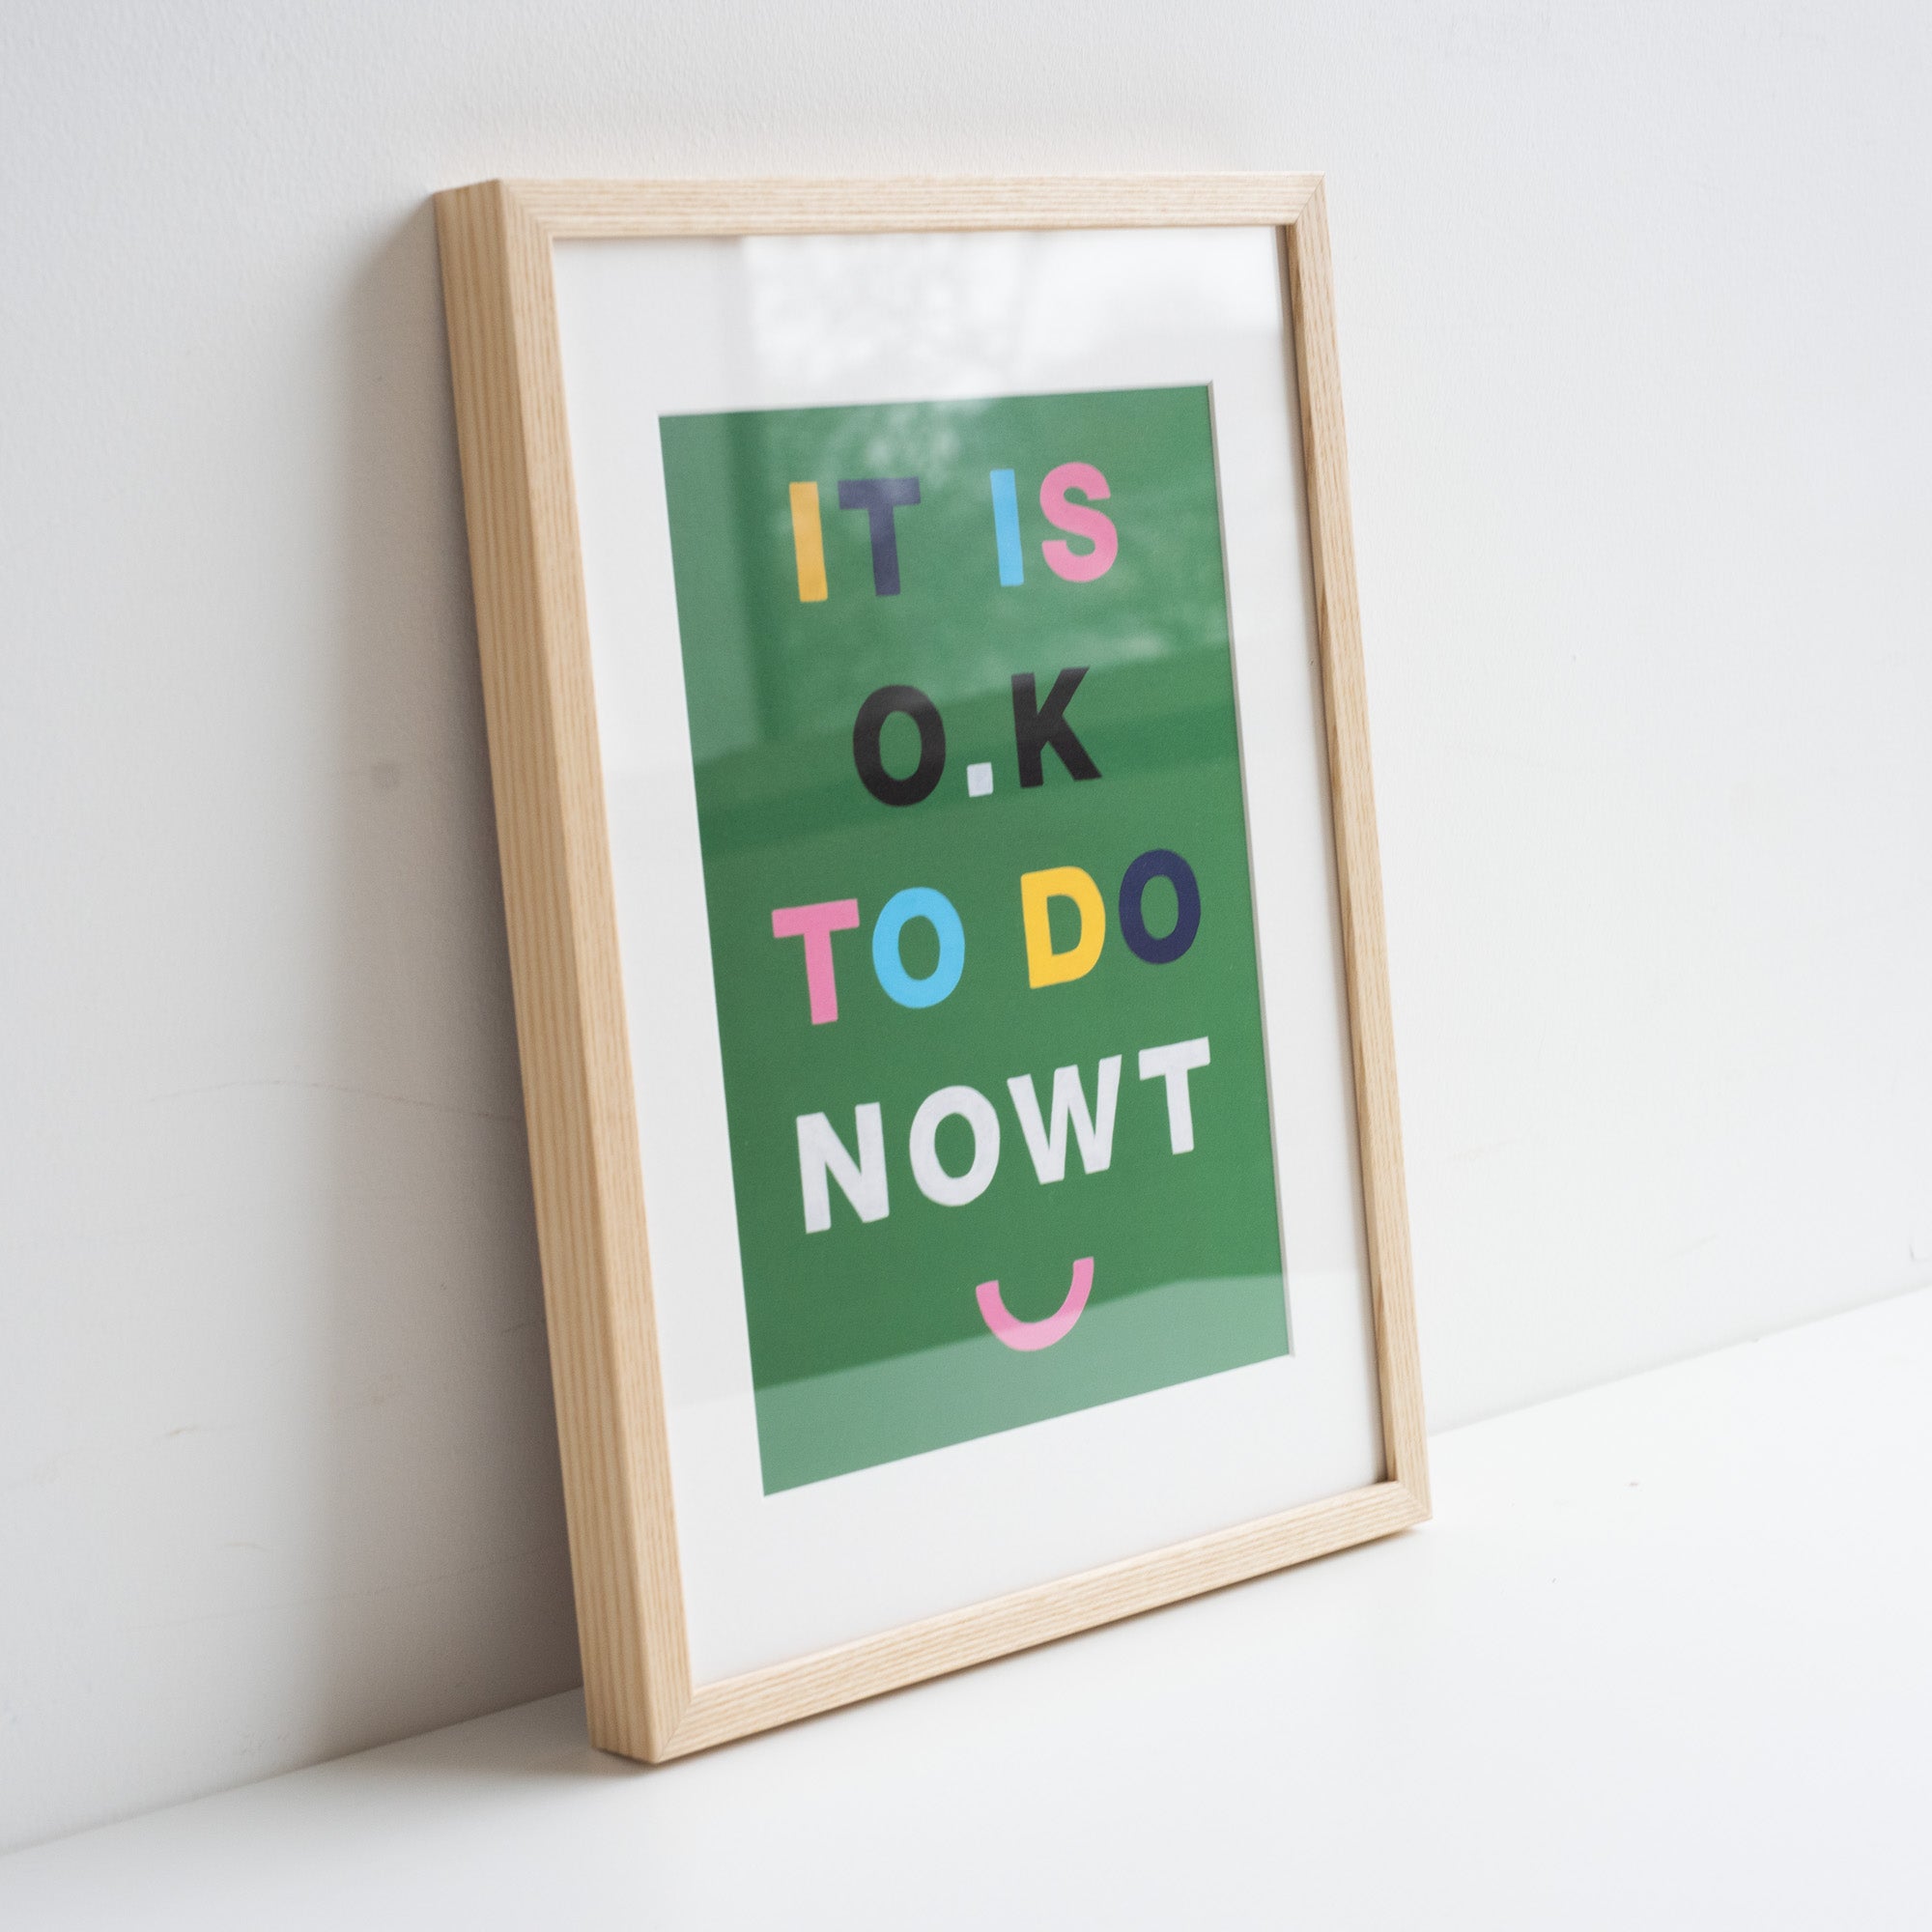 Artwork by Mikesian studio in an ash frame, rested against a white wall. Green background with colourful typography